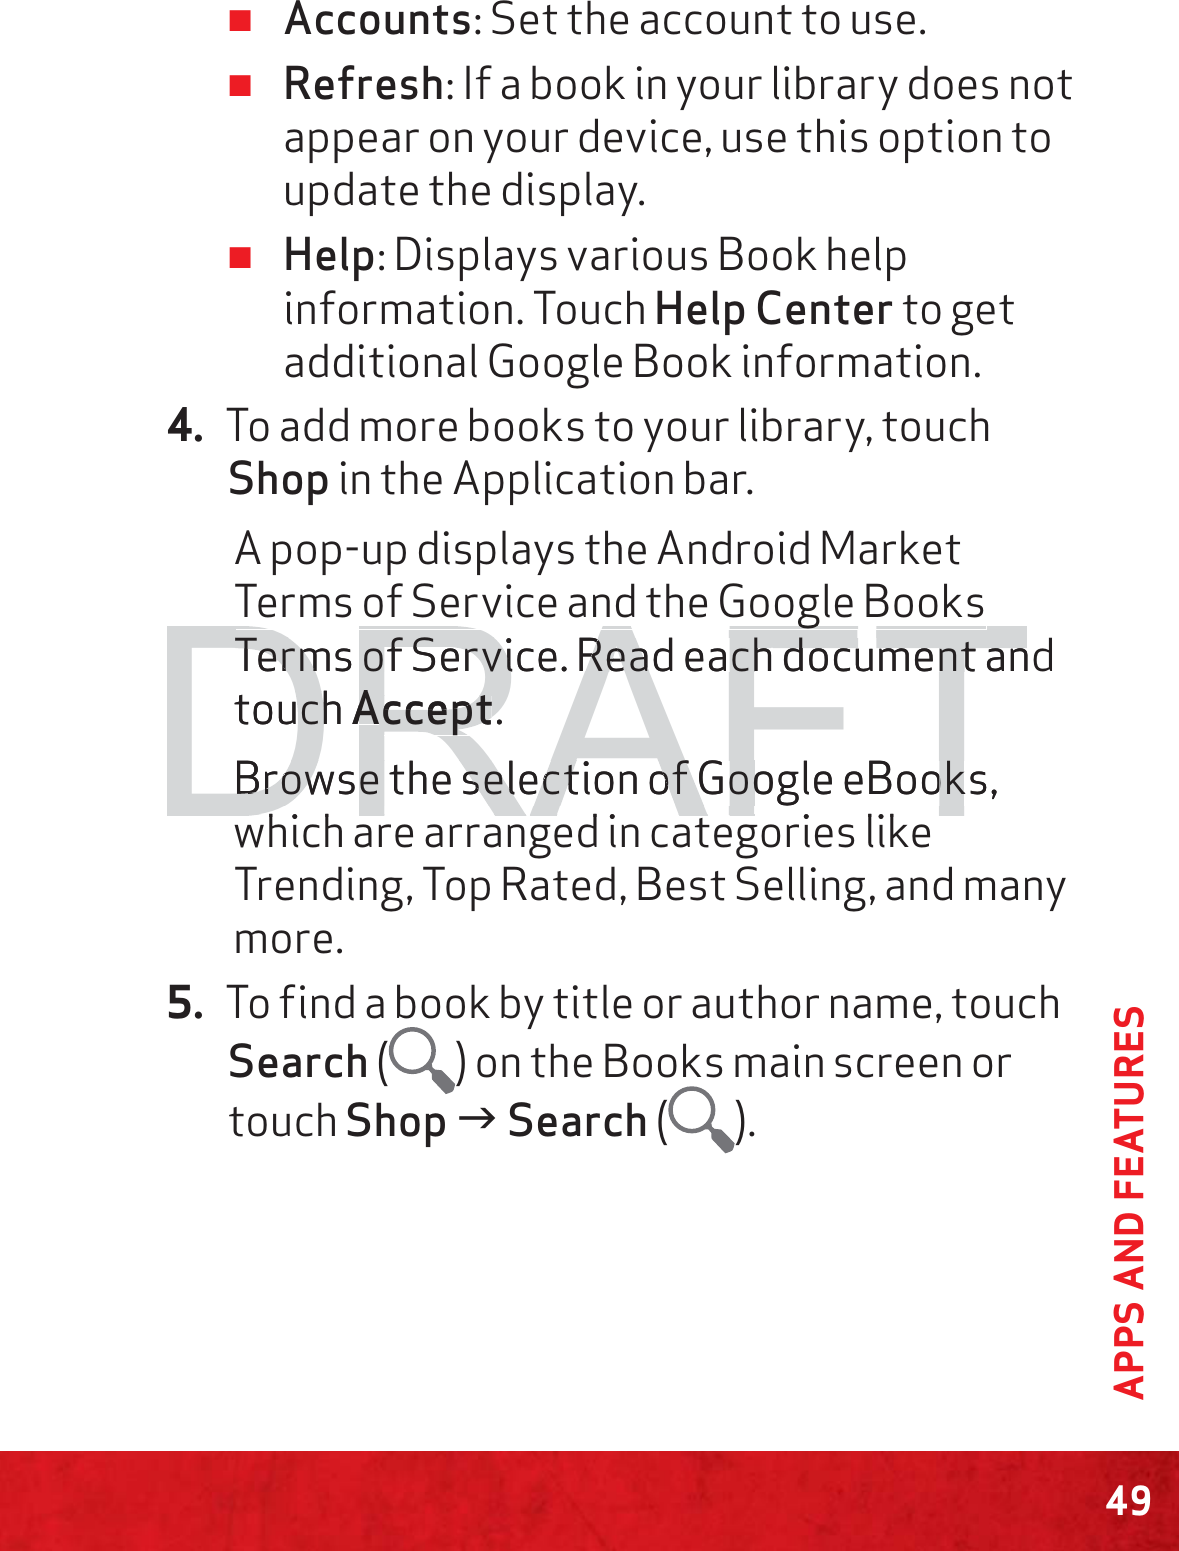 49APPS AND FEATURES ≠Accounts: Set the account to use. ≠Refresh: If a book in your library does not appear on your device, use this option to update the display. ≠Help: Displays various Book help information. Touch Help Center to get additional Google Book information.4. To add more books to your library, touch Shop in the Application bar.A pop-up displays the Android Market Terms of Service and the Google Books Terms of Service. Read each document and touch Accept.Browse the selection of Google eBooks, which are arranged in categories like Trending, Top Rated, Best Selling, and many more.5. To find a book by title or author name, touch Search ( ) on the Books main screen or touch Shop J Search ( ).DRAFTggTerms of Service.Terms of ServiRRead eachead each document an document antouch uchAAcceptccept.BBrowse the selection of Google eBooks, rowse the selection of Google eBookhi h d i i likhi h d i